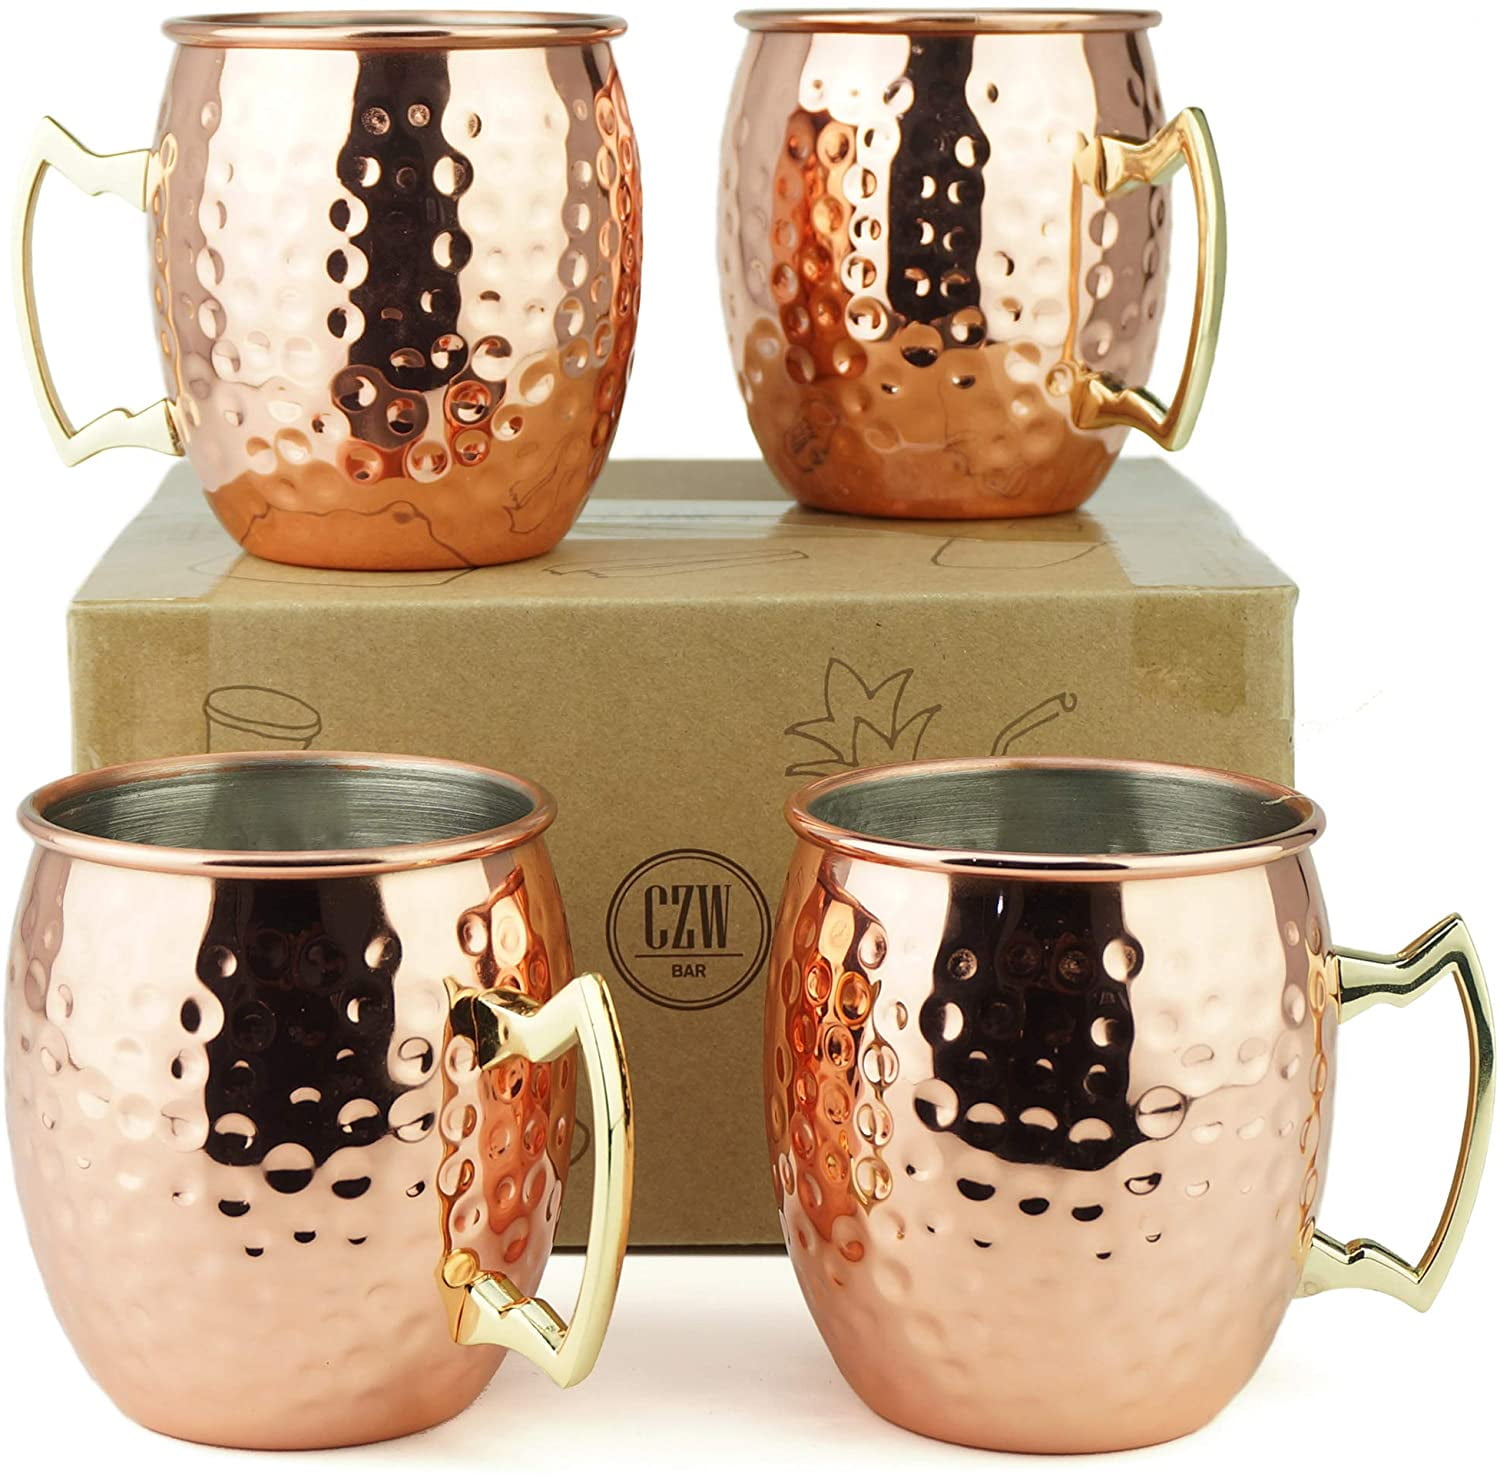 18 Oz 2 Moscow Mule Mug Cup Drinking Hammered Copper Brass Steel Gift Set